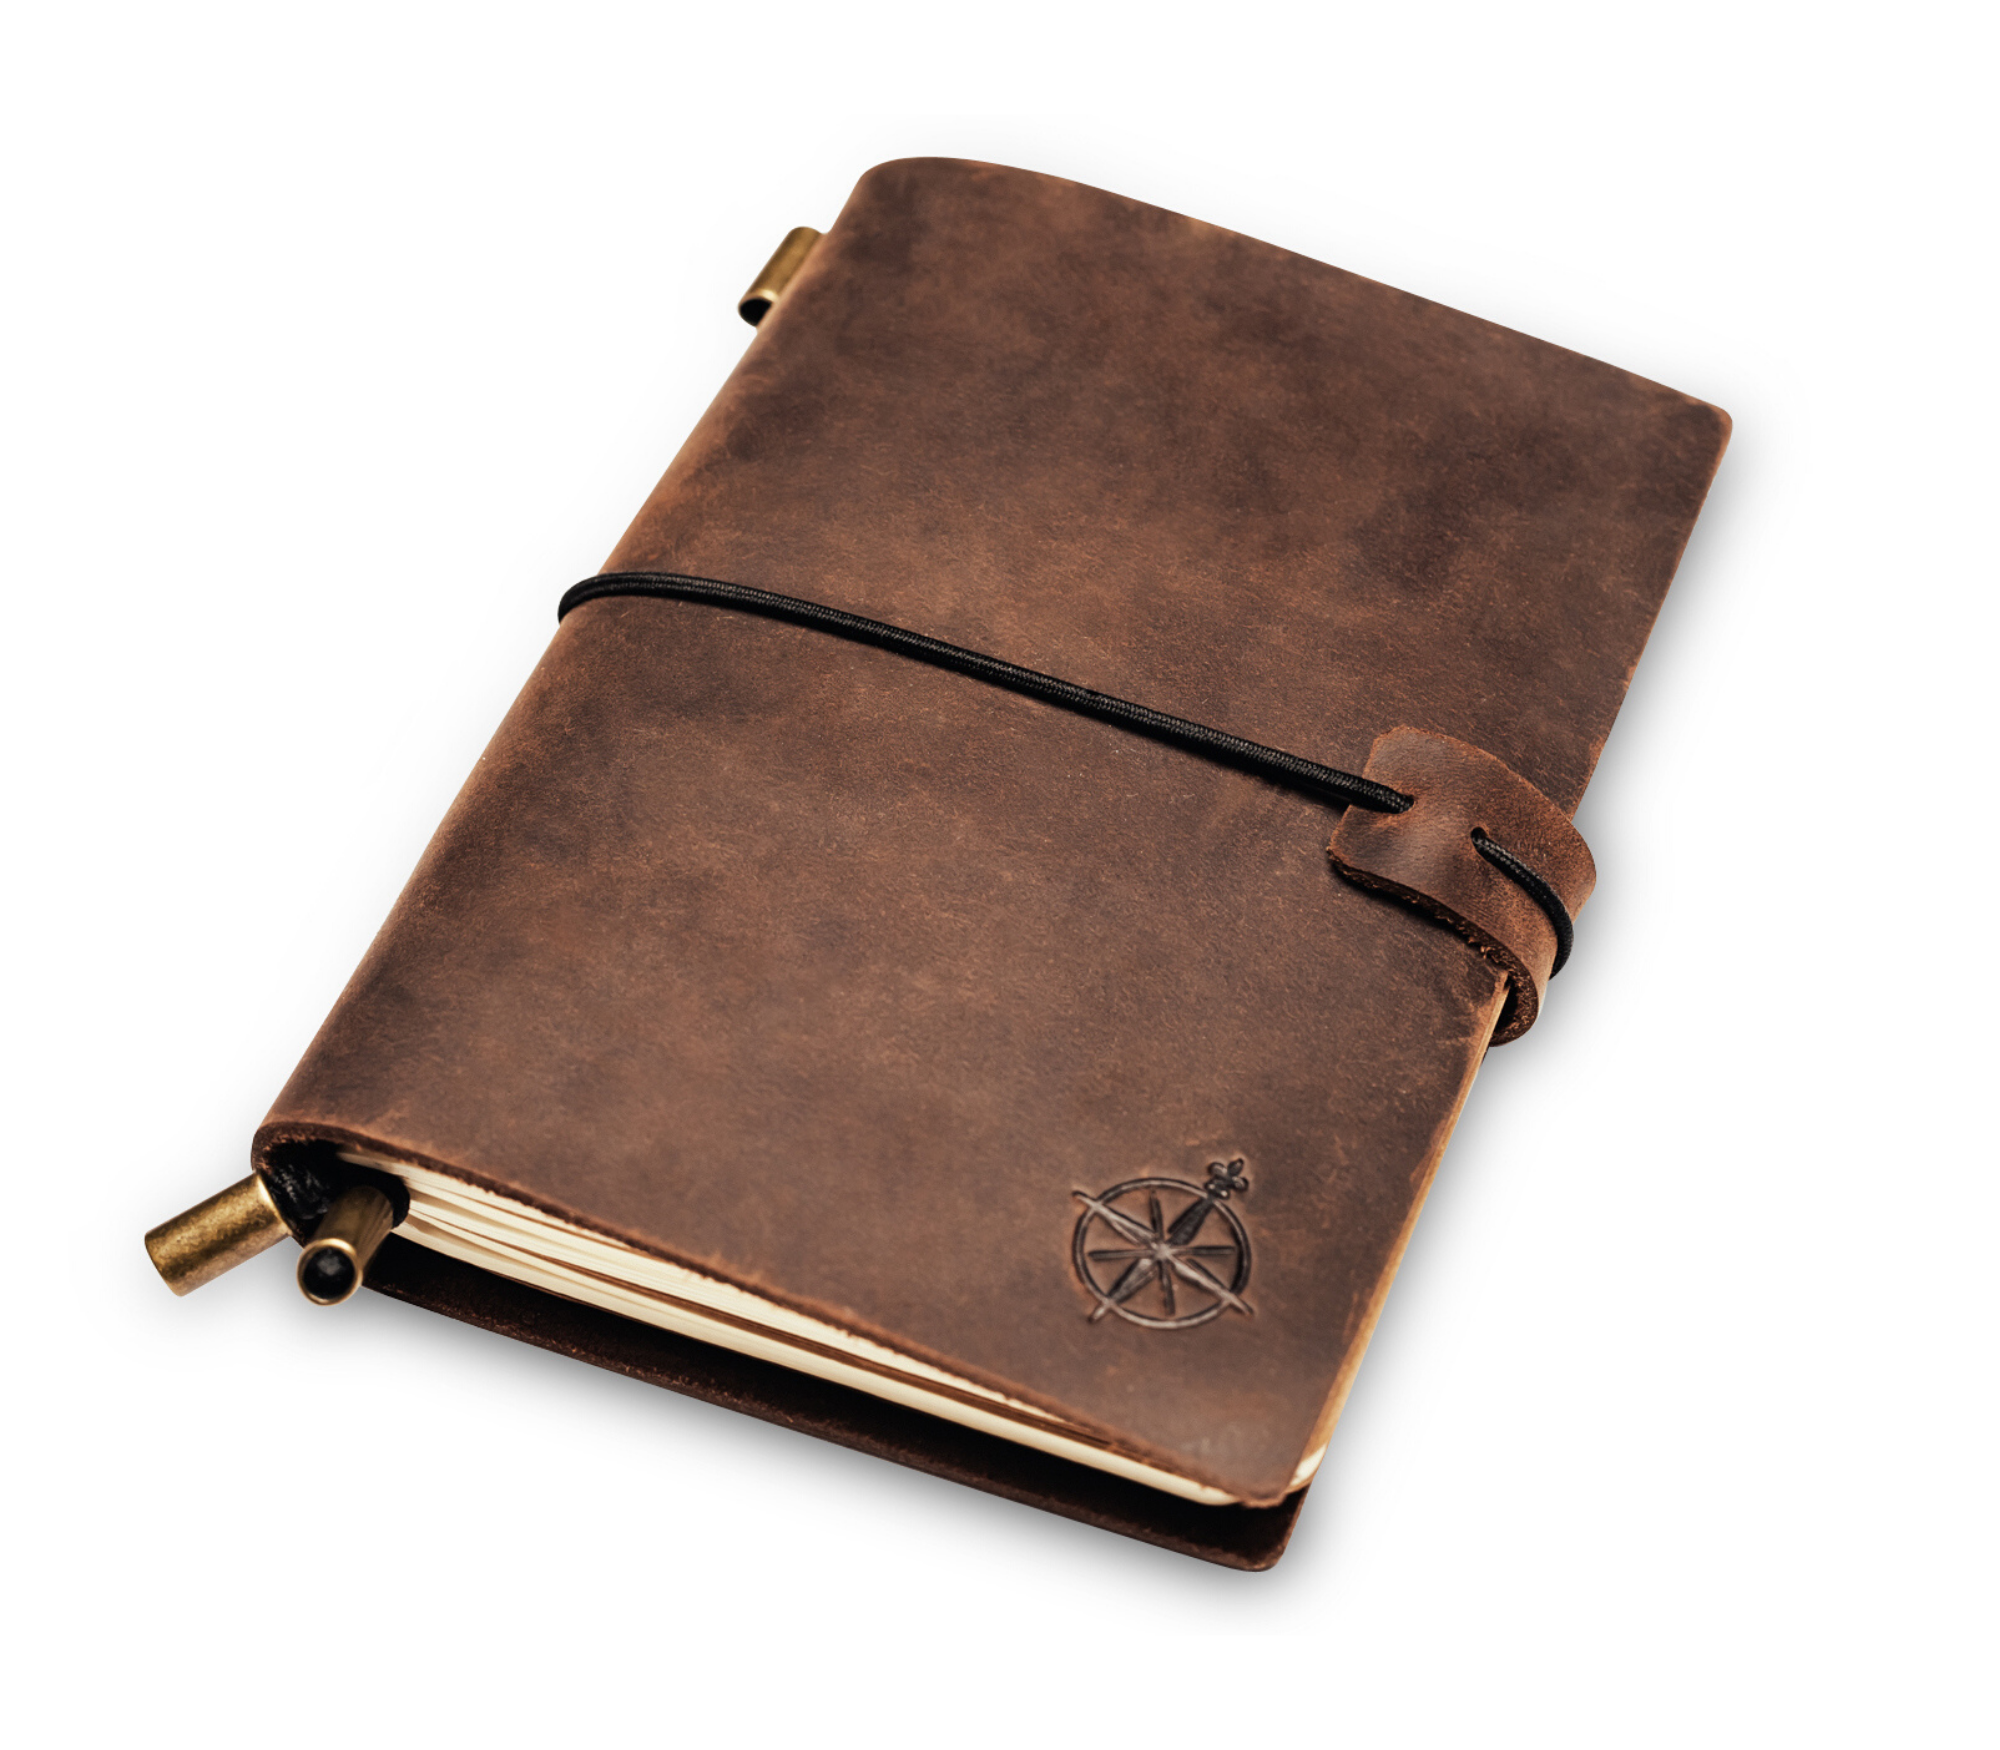 Travel Journal Series by Modest Goods - Refillable Leather Cover and A5  Notebook - Travel Accessories for Men & Women - Great for Traveler  Adventure